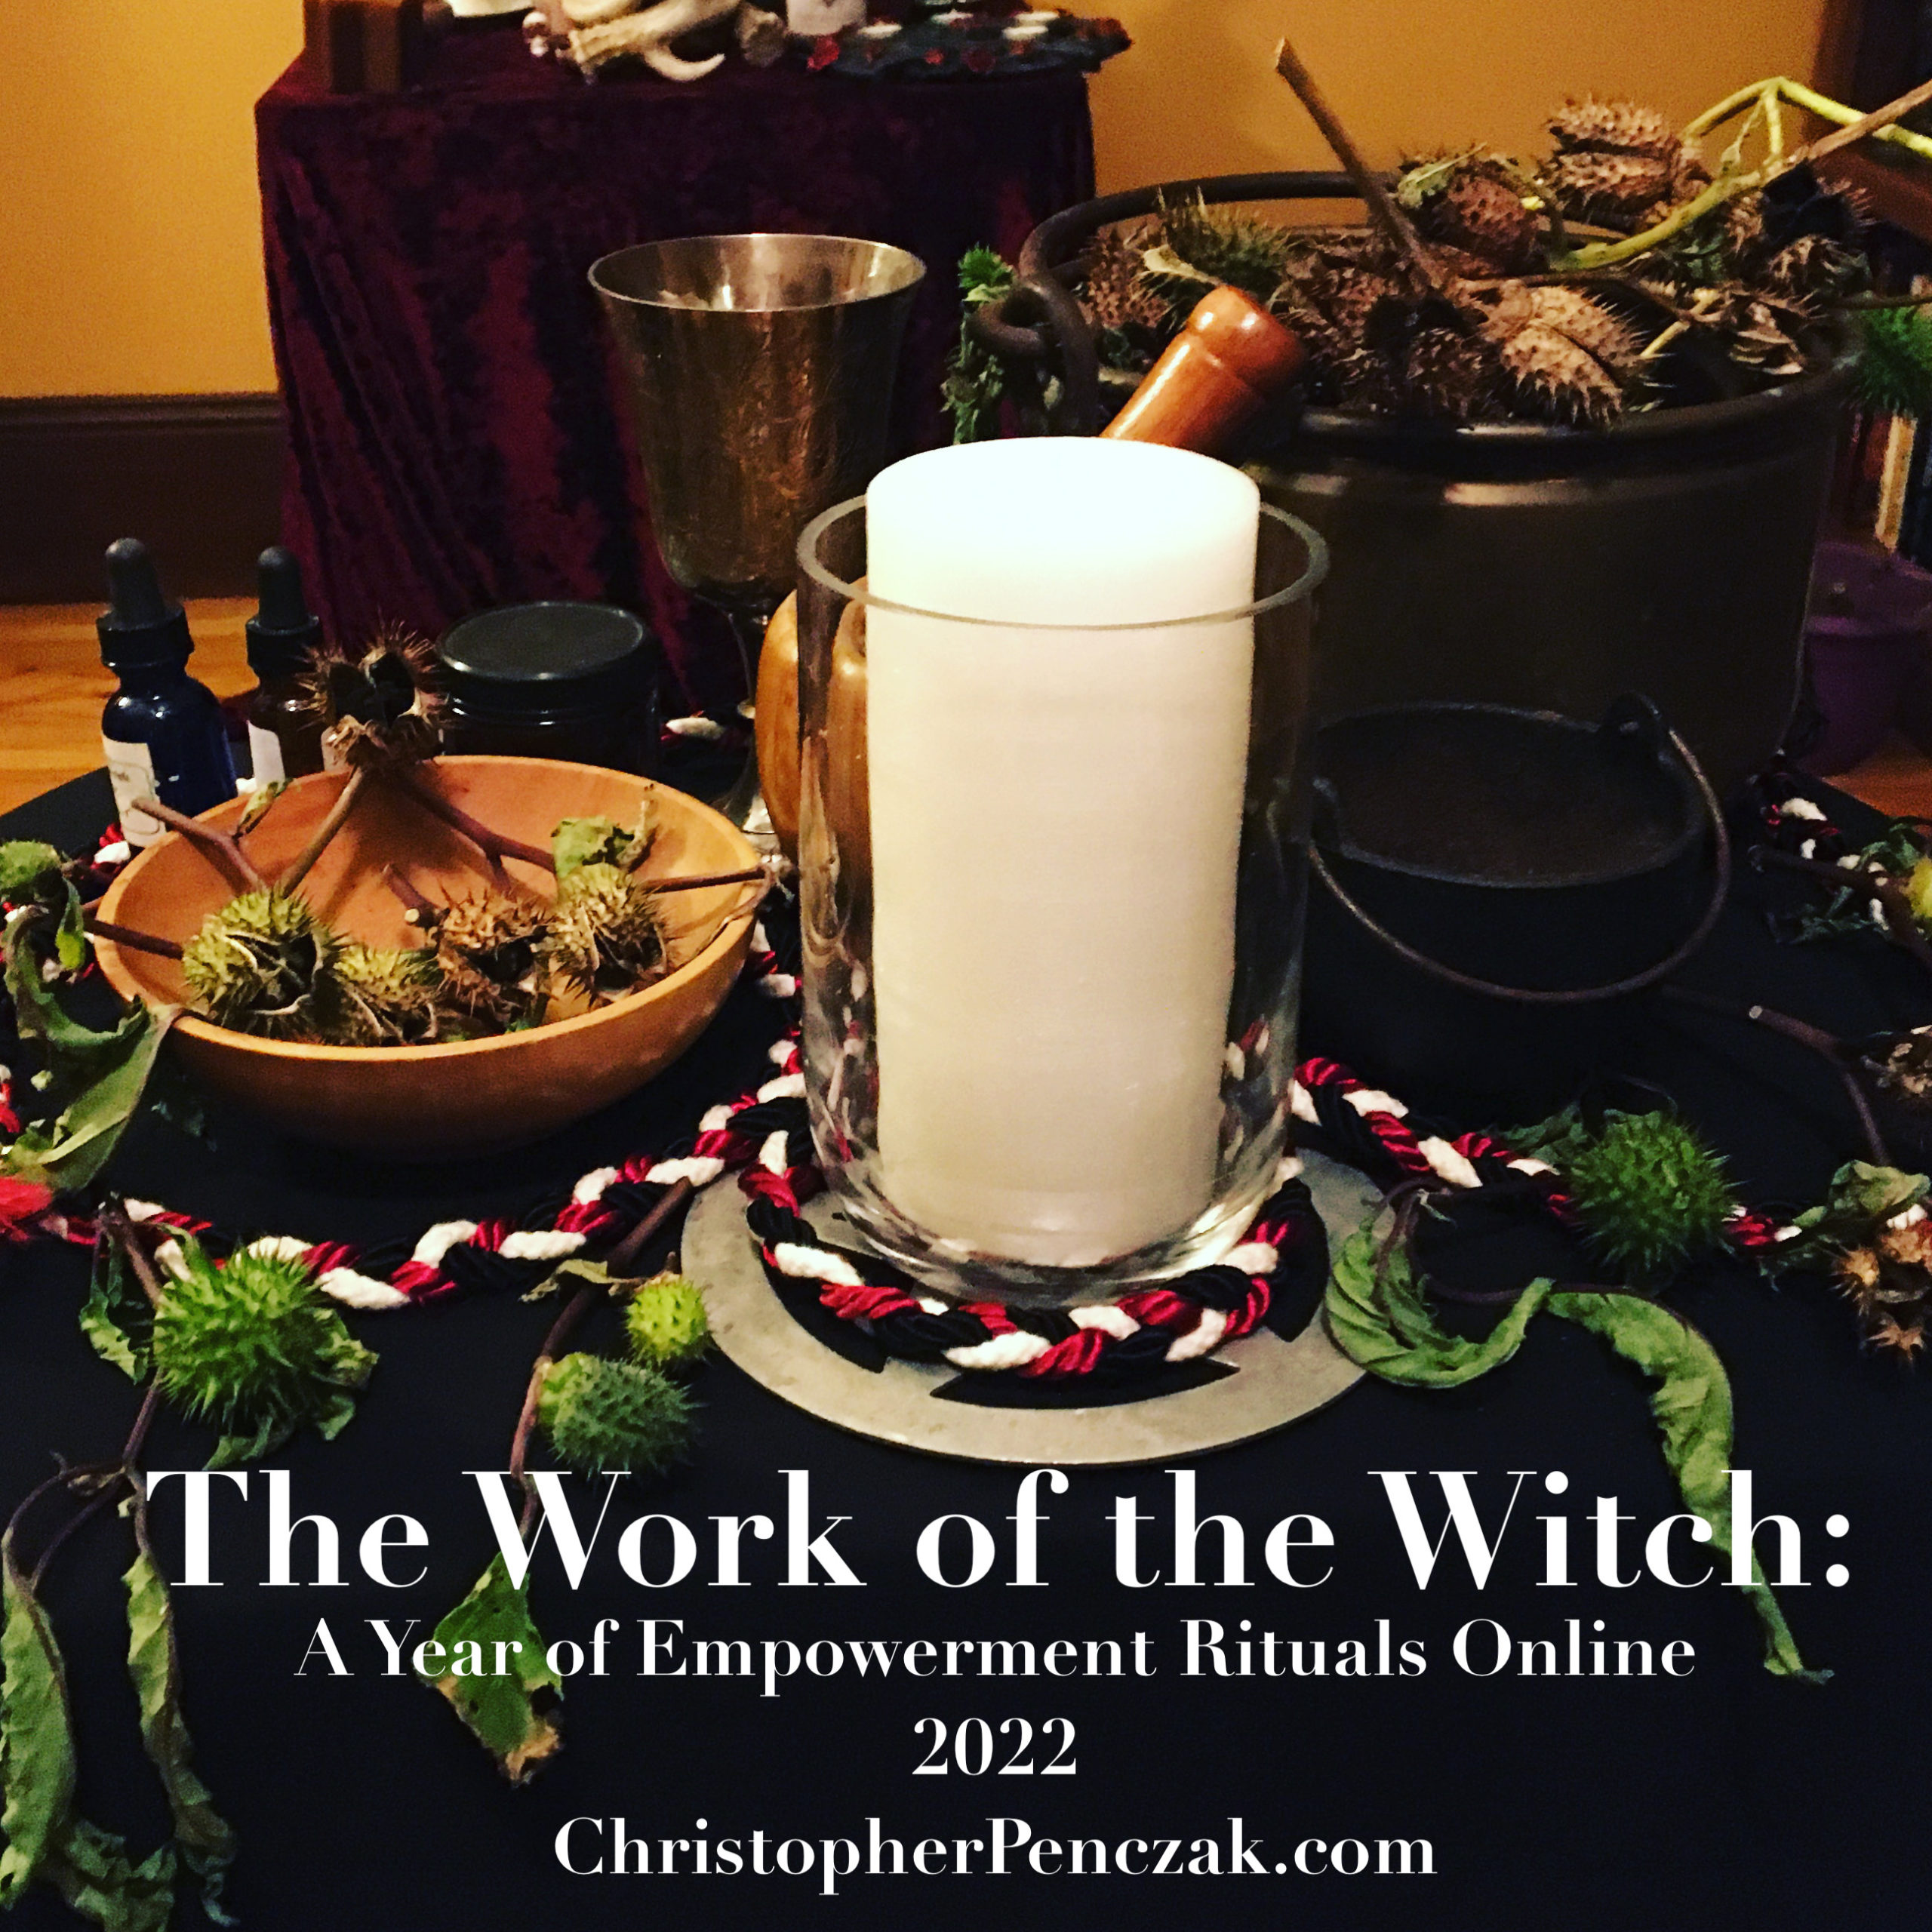 The Work of the Witch: A Year of Empowerment Rituals Online With Christopher Penczak